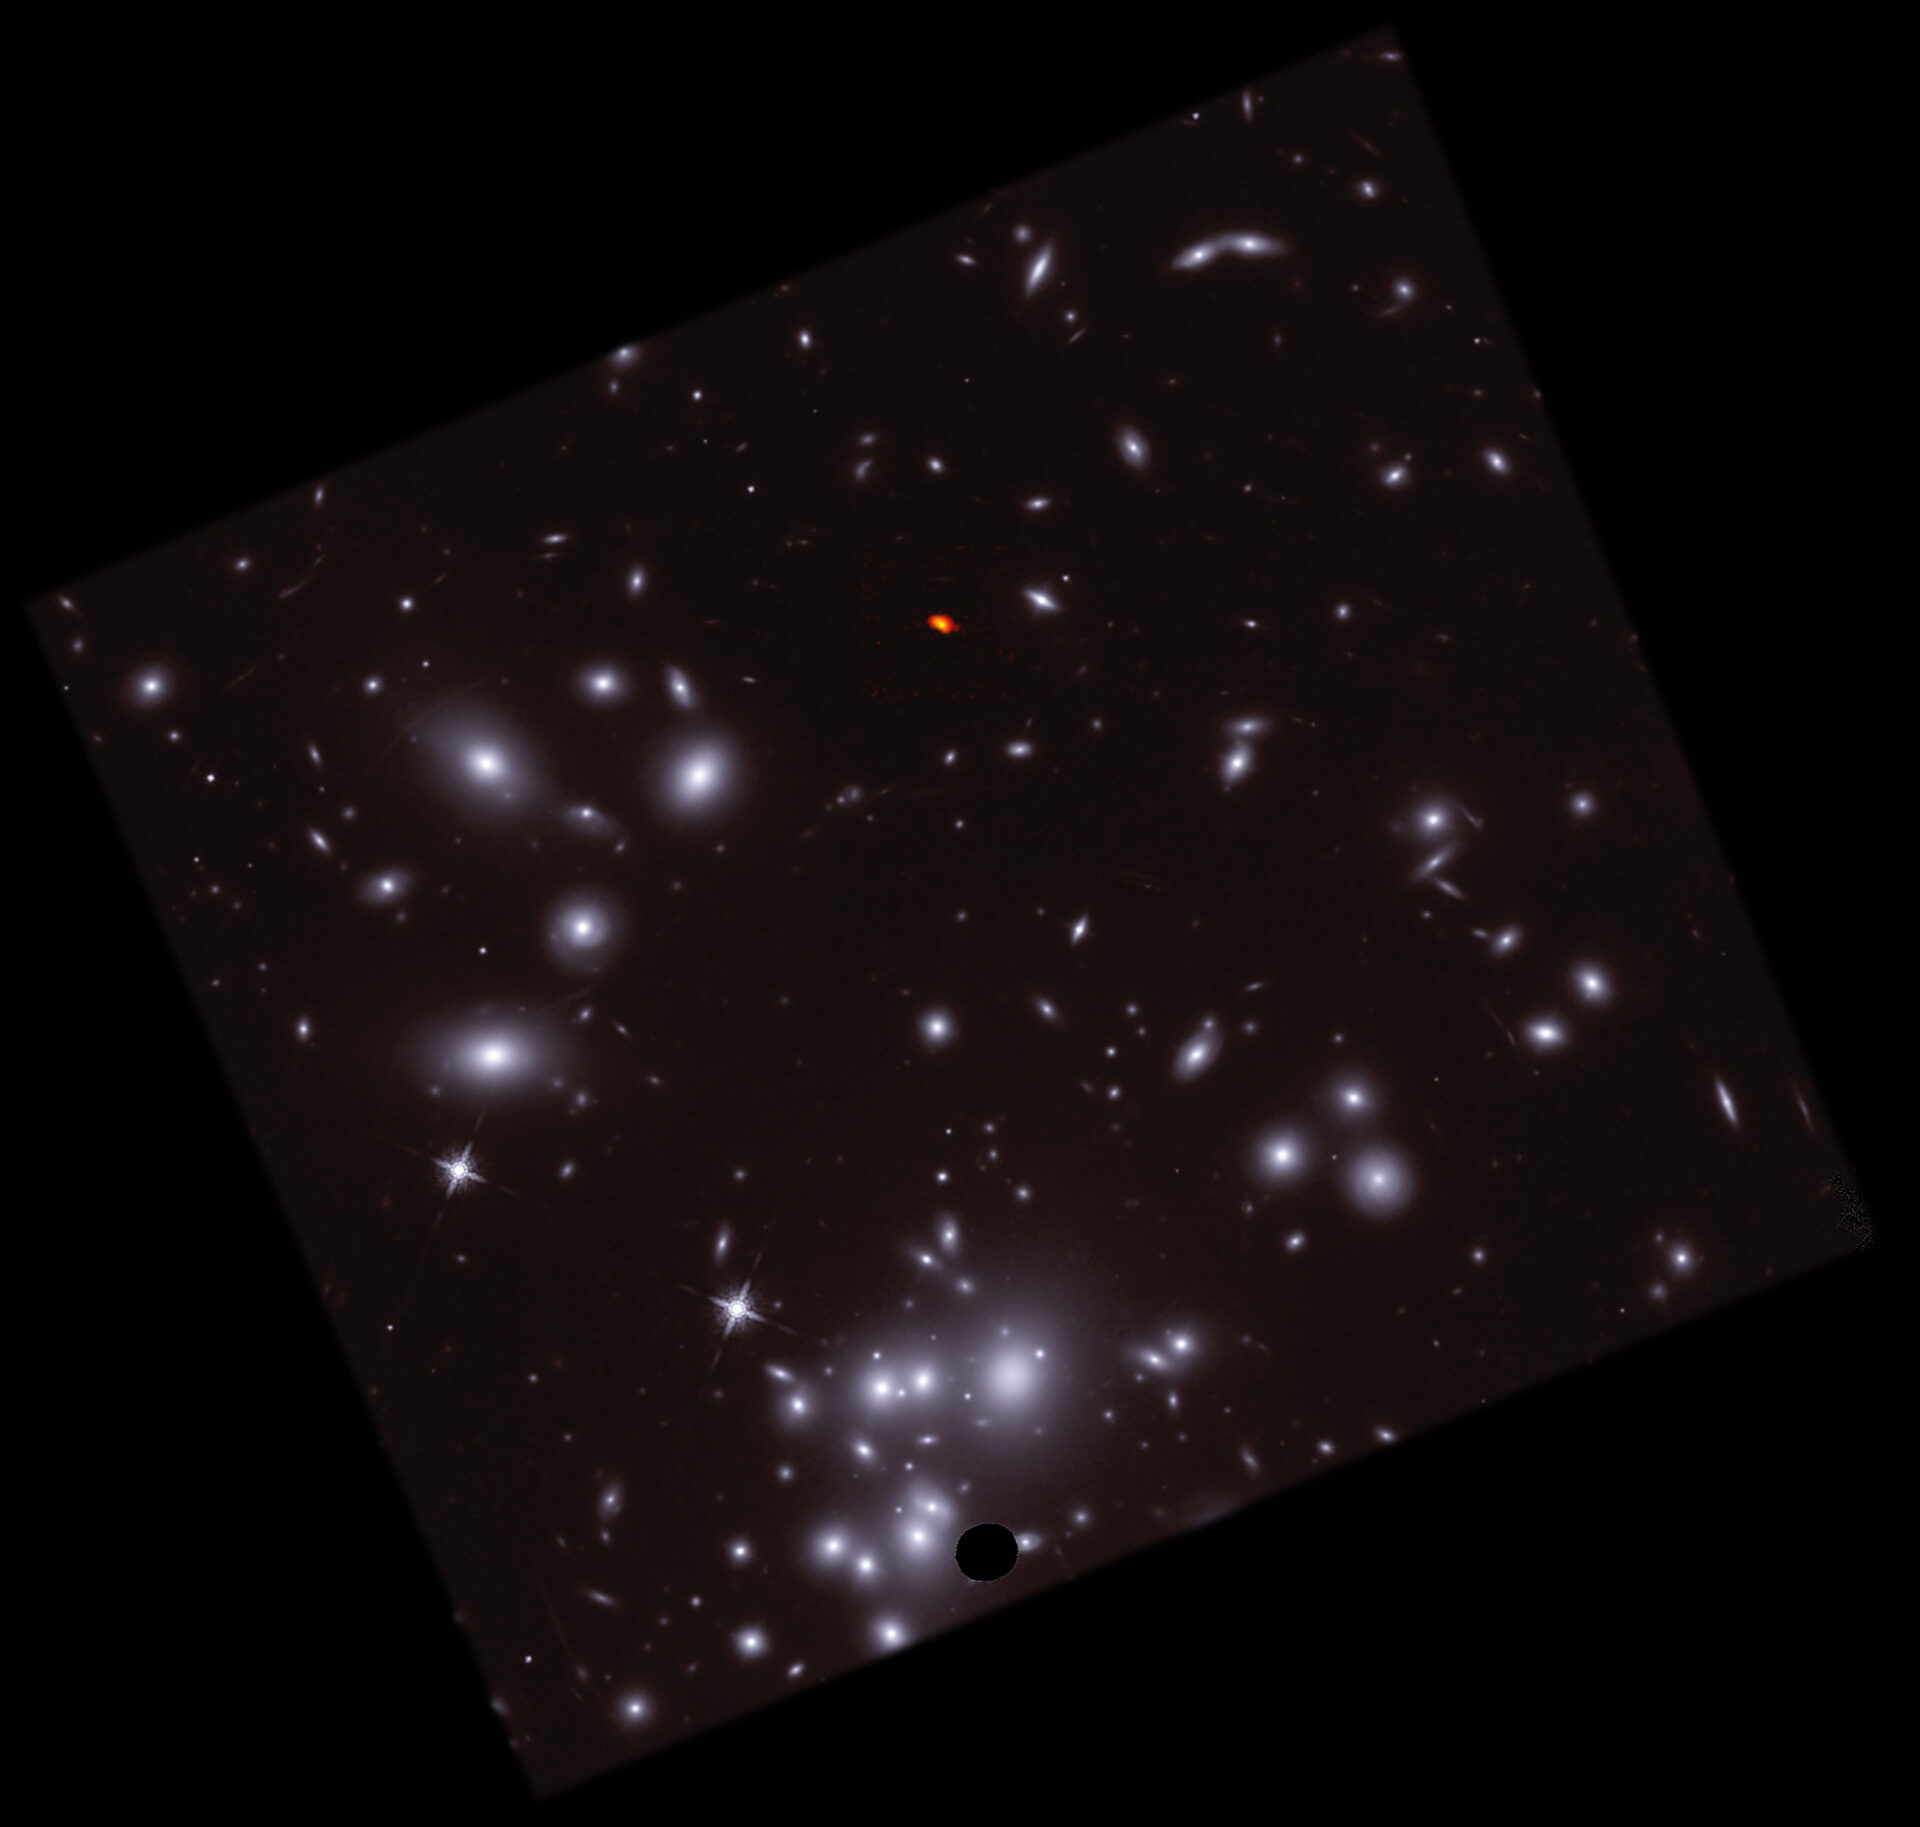 <p>This composite combines radio images of A1689-zD1, captured using the Atacama Large Millimeter/submillimeter Array (ALMA), shown in orange/red, with optical images from the Hubble Space Telescope (HST), shown in blue/white. In the context of its surroundings, it becomes clear how A1689-zD1 managed to “hide out” behind Abell 1689, and why gravitational lensing— the magnification of the young galaxy— are critical to studying its behaviors and processes. Credit: ALMA (ESO/NAOJ/NRAO)/H. Akins (Grinnell College), HST, B. Saxton (NRAO/AUI/NSF)</p>
